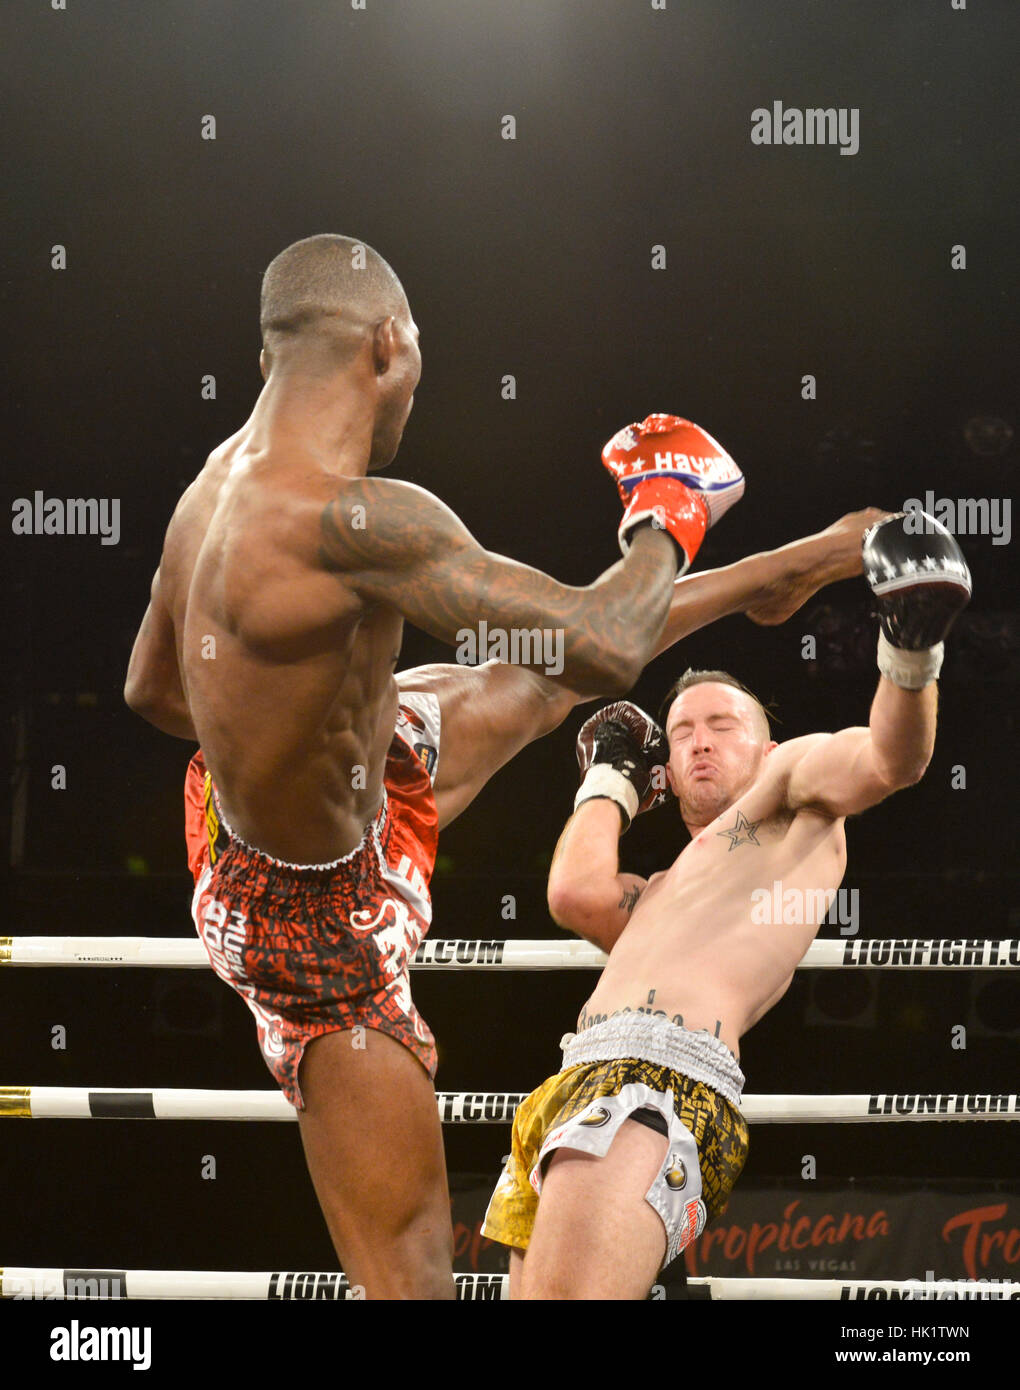 Las Vegas, USA. 3rd Feb, 2017. Muay Thai Lion Fight 34 at the Tropicana Hotel and Casino,   Anthony “The Assassin” Njokuani. Credit: Ken Howard Images/Alamy Live News Stock Photo